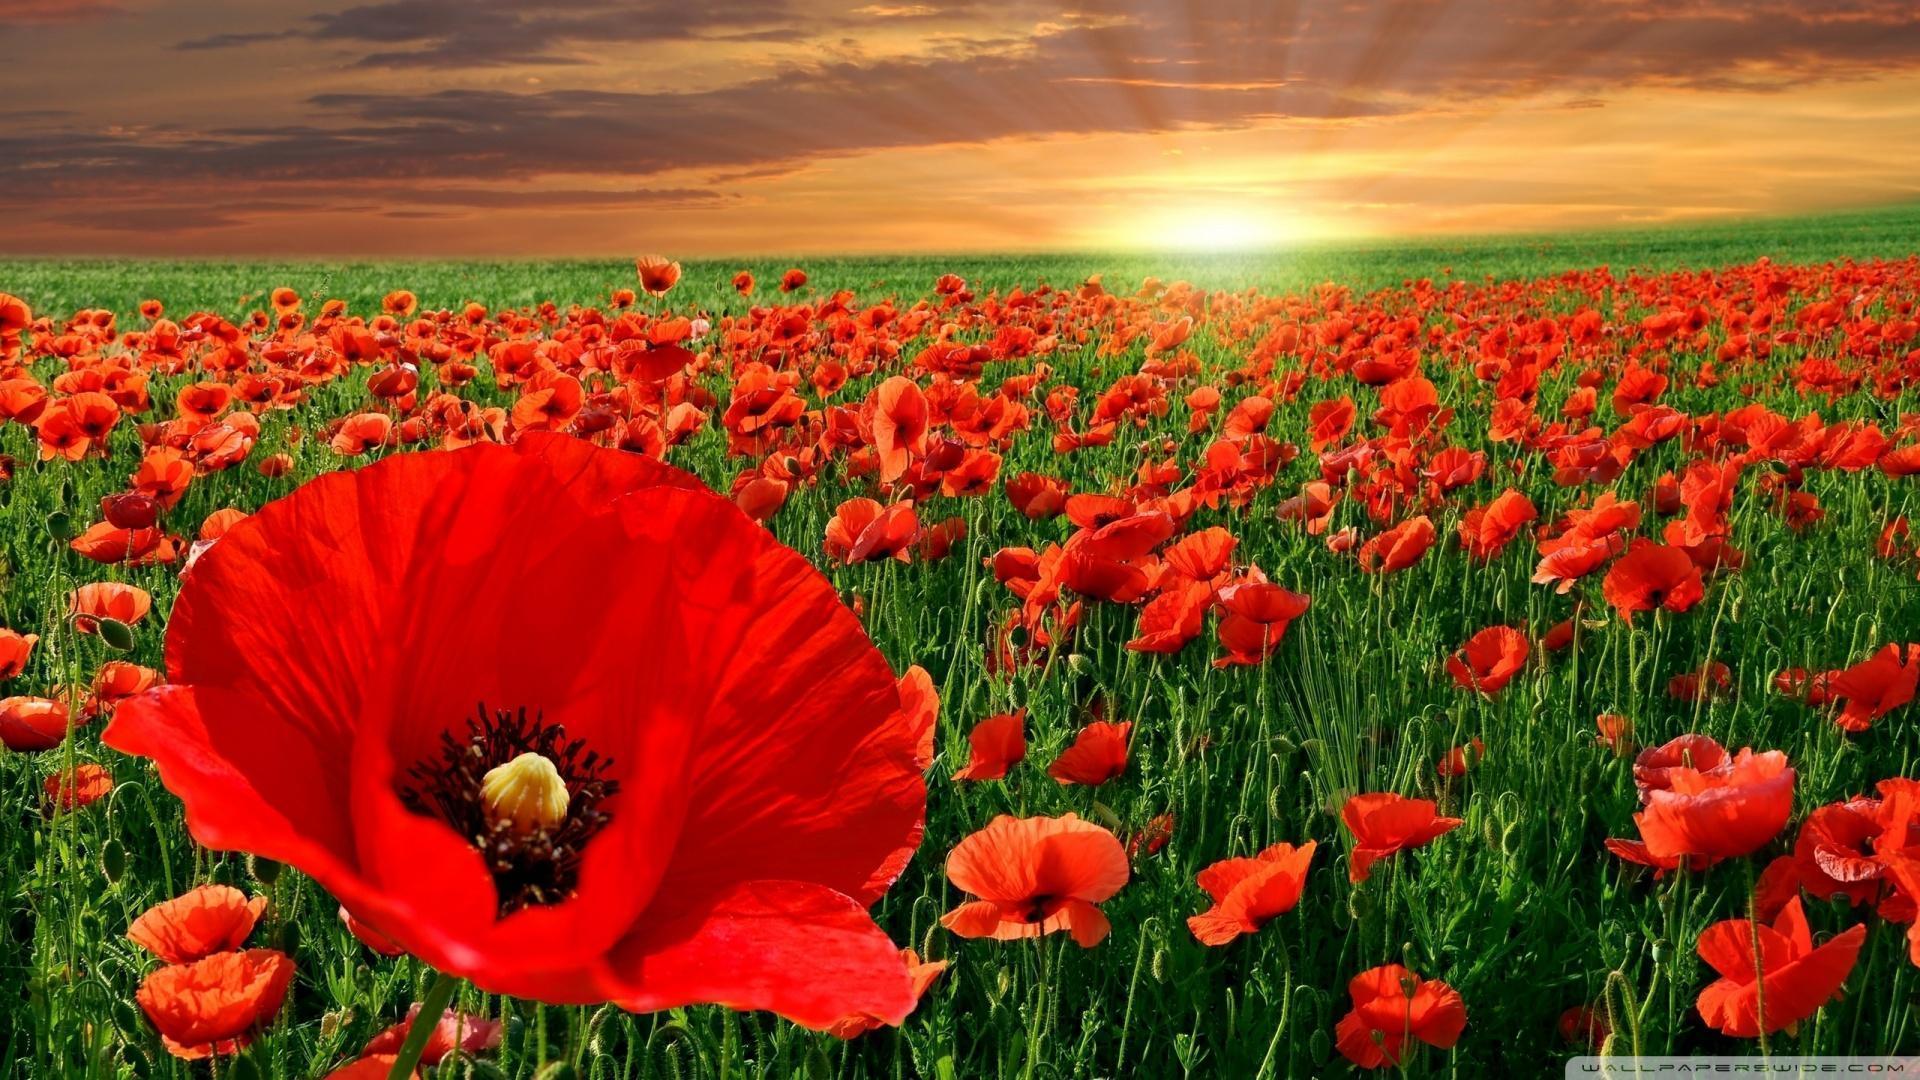 Sunset Over A Field Of Poppies Wallpaper 1920x1080 px Free